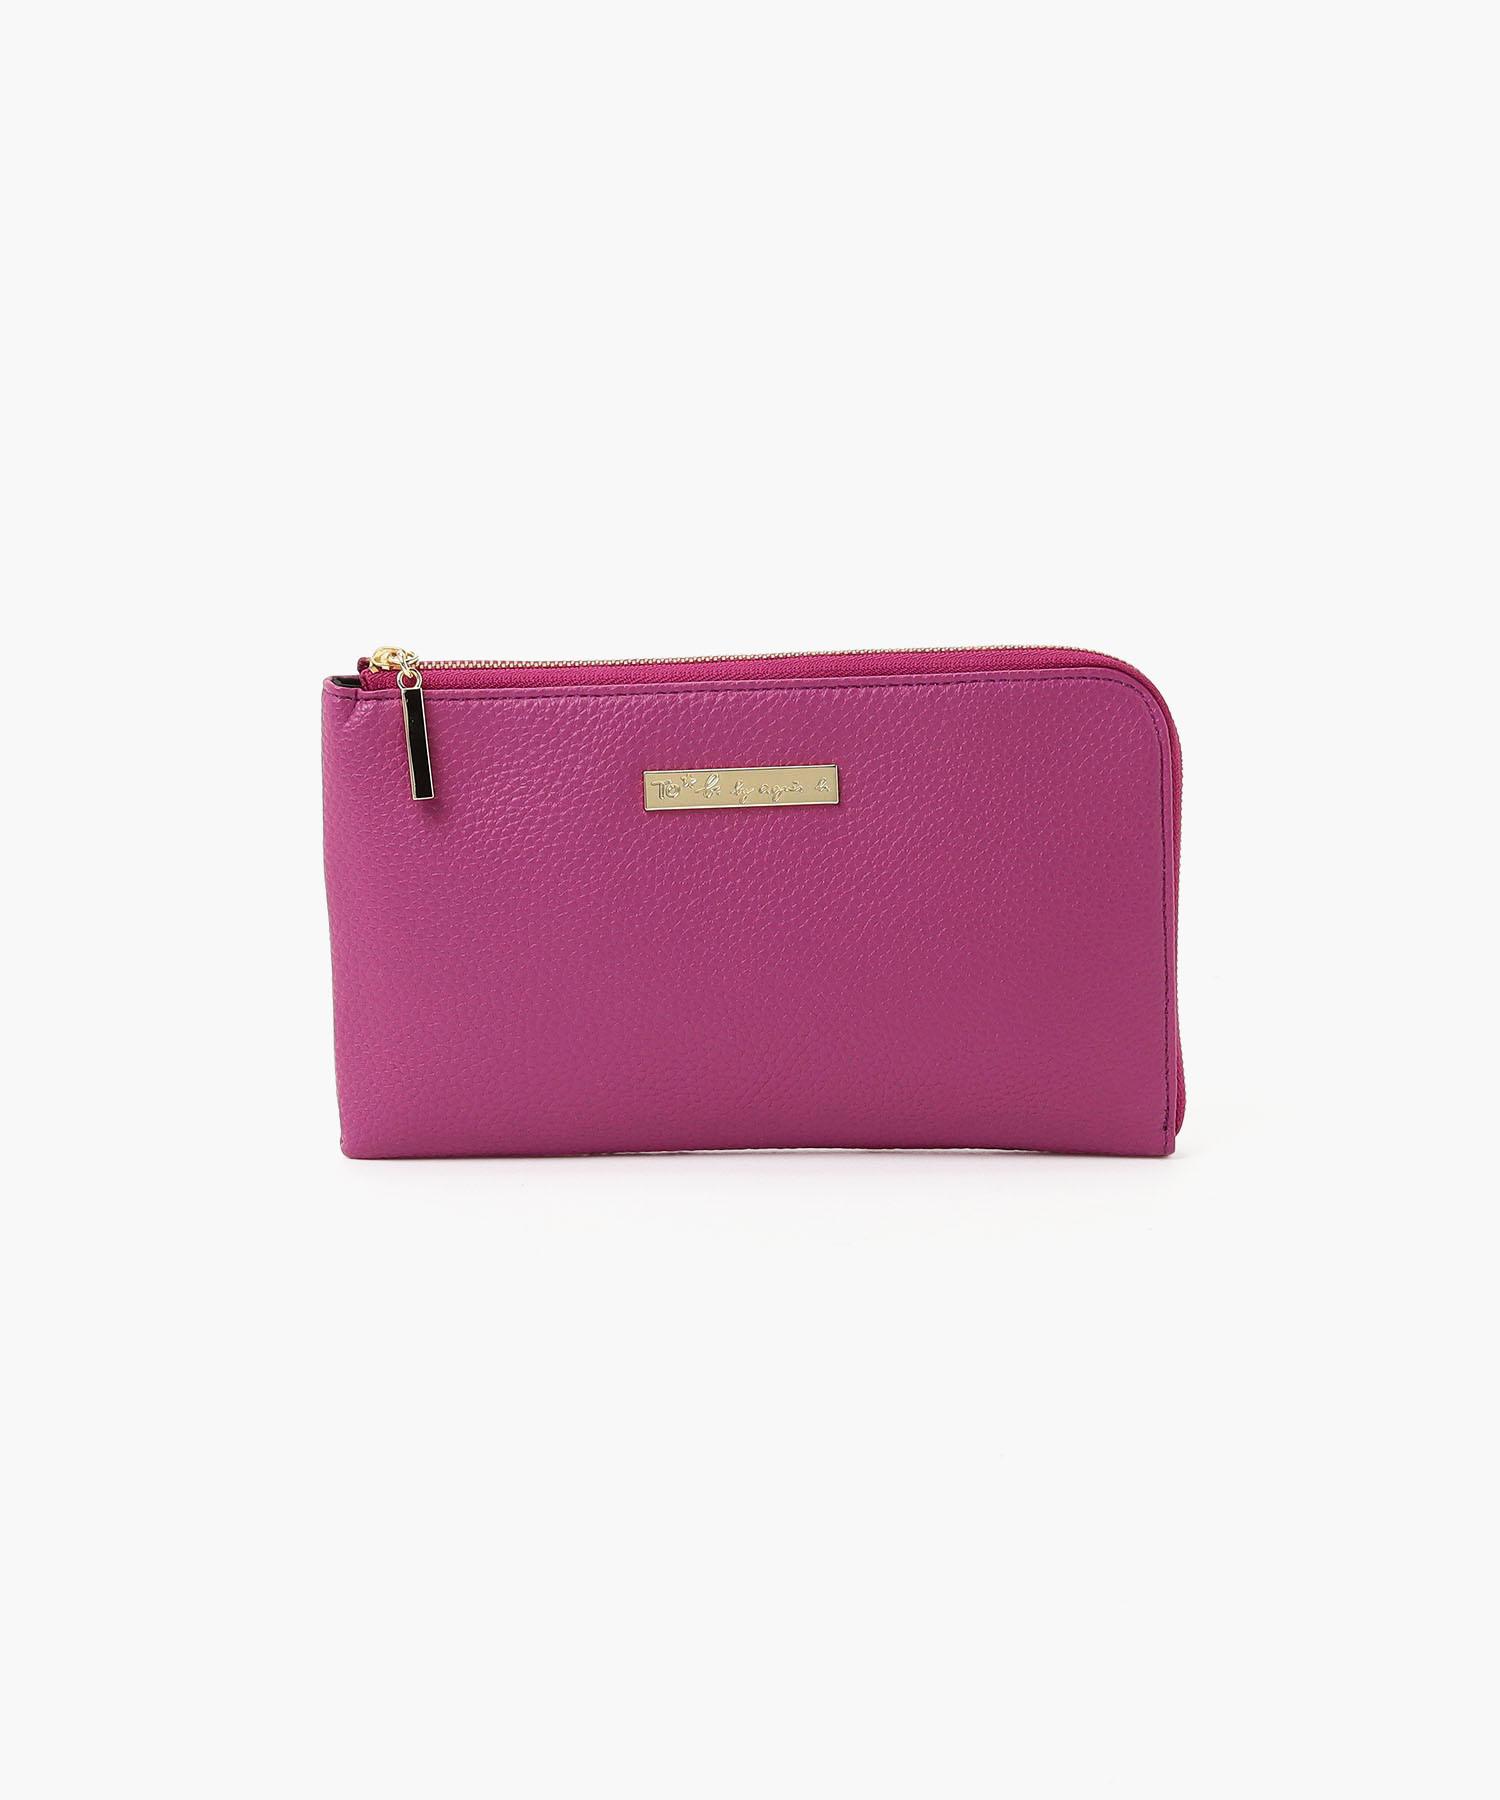 To b. by スーパーセール agnes ウォレットバッグ b.WP60 【SALE／77%OFF】 POUCH